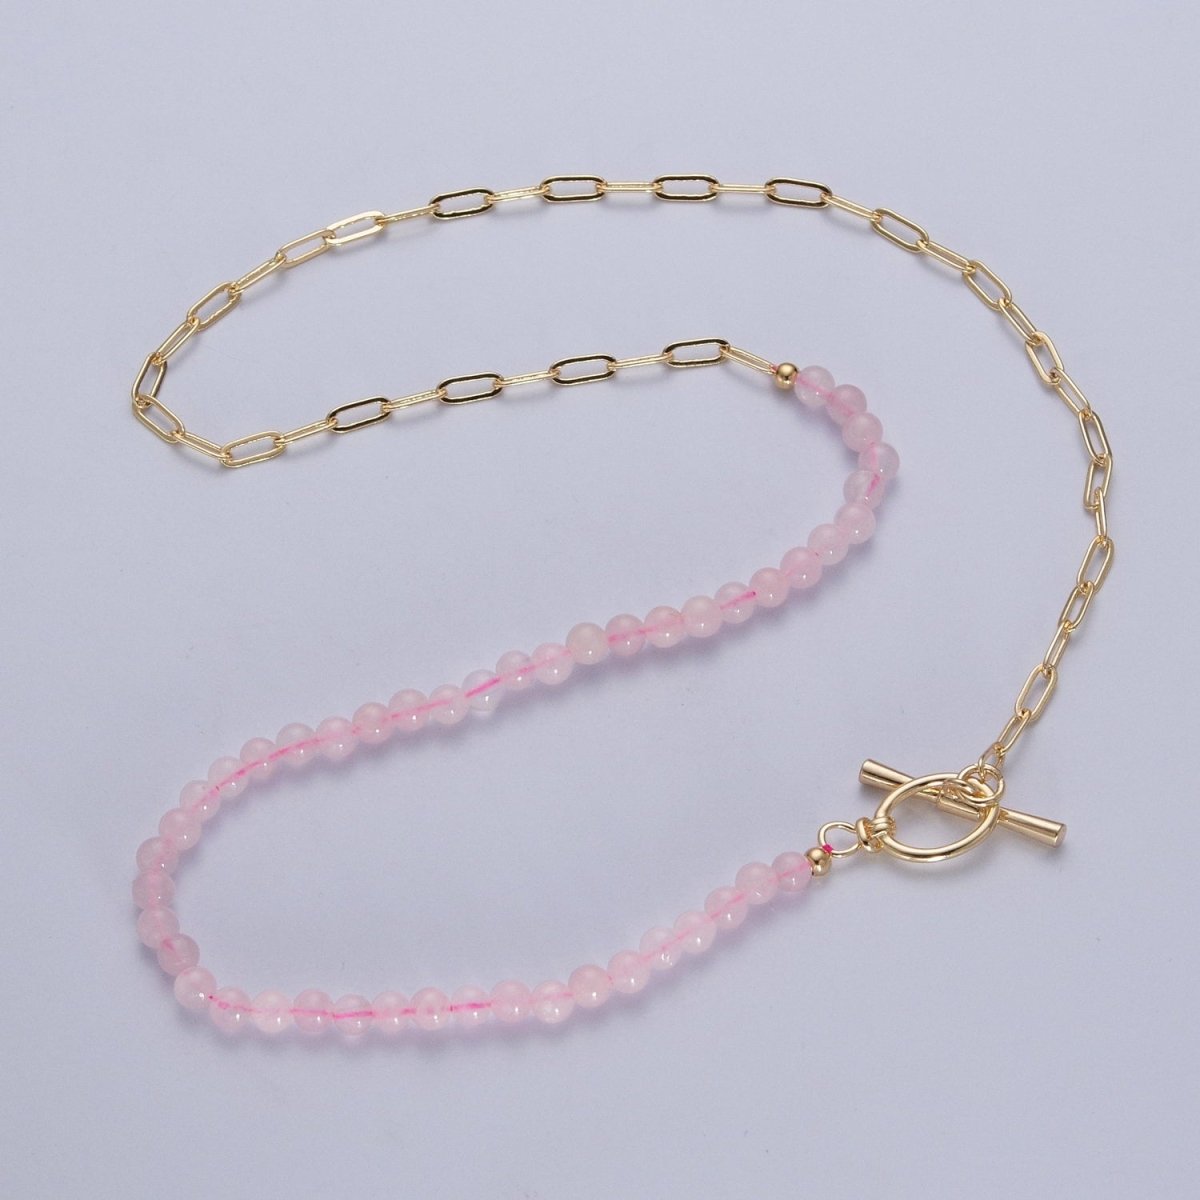 Dainty Half Bead Half Link Chain Necklace, 24k Gold Filled Paperclip Chain with Pink Quartz Necklace with Oval Toggle Clasps | WA-1019 Clearance Pricing - DLUXCA